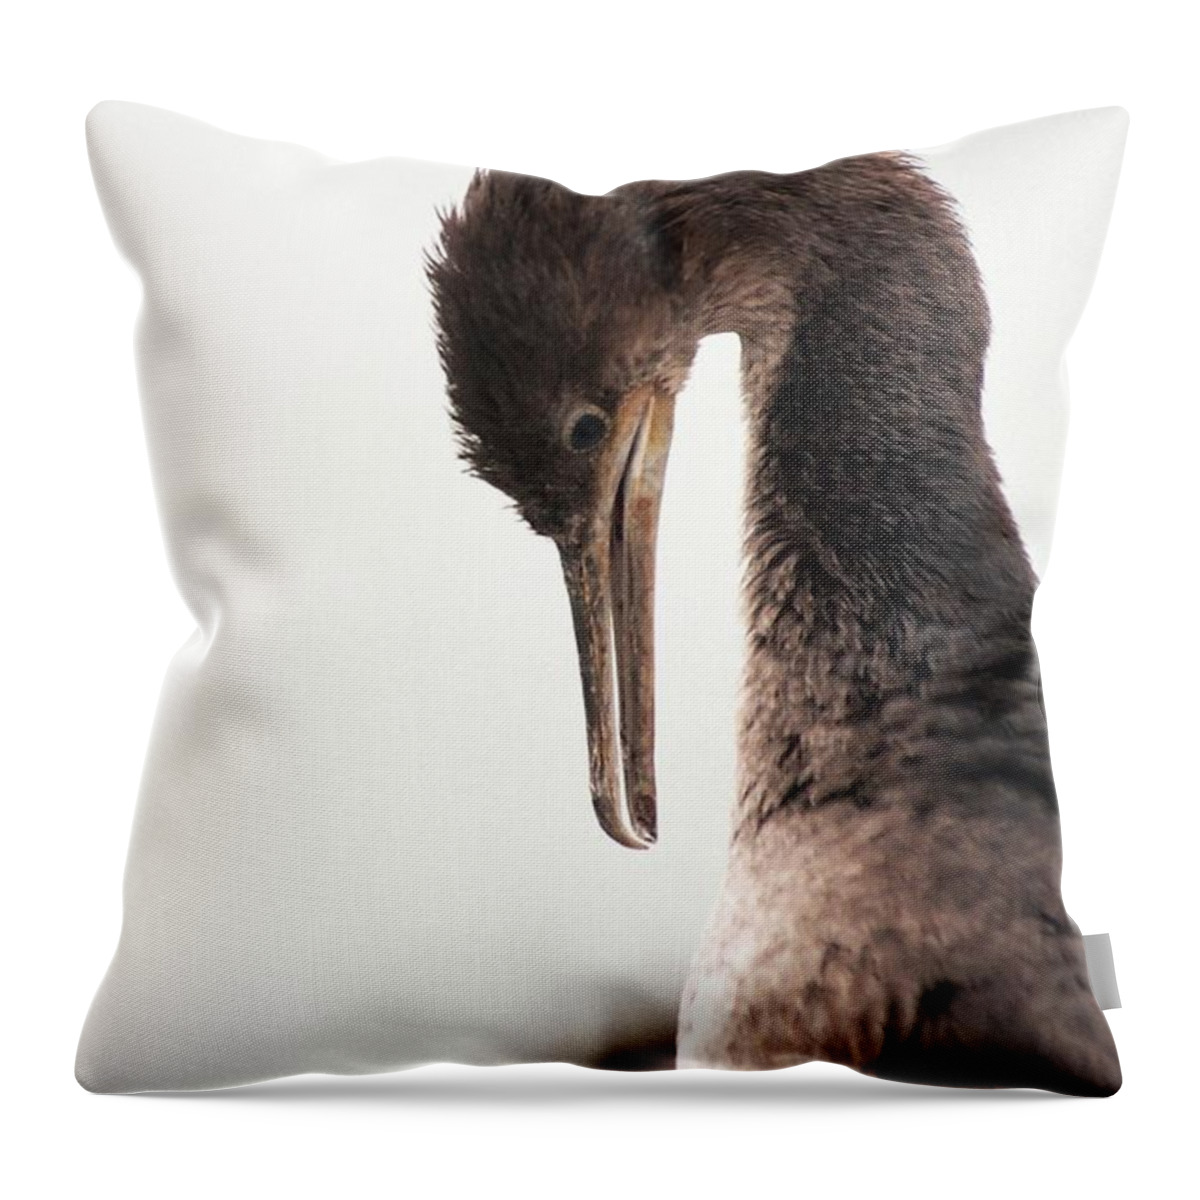 Fine Art America Throw Pillow featuring the photograph Well Groomed by Andrew Hewett